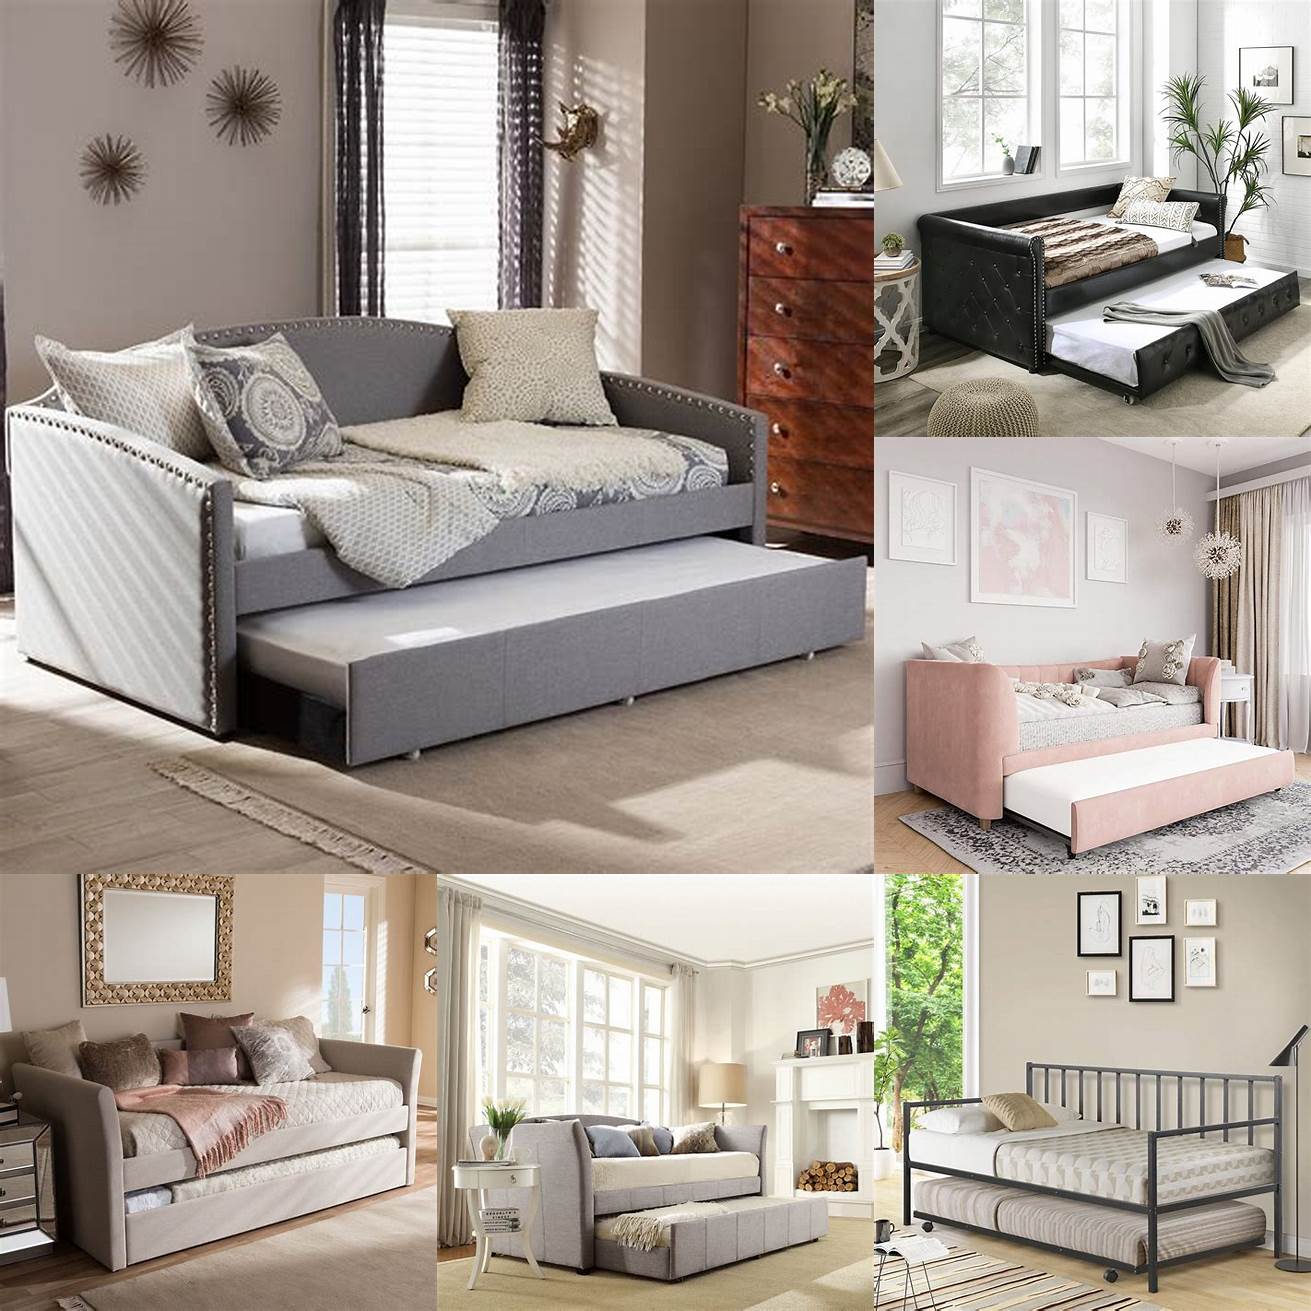 Daybeds with trundle are perfect for small living rooms or studio apartments